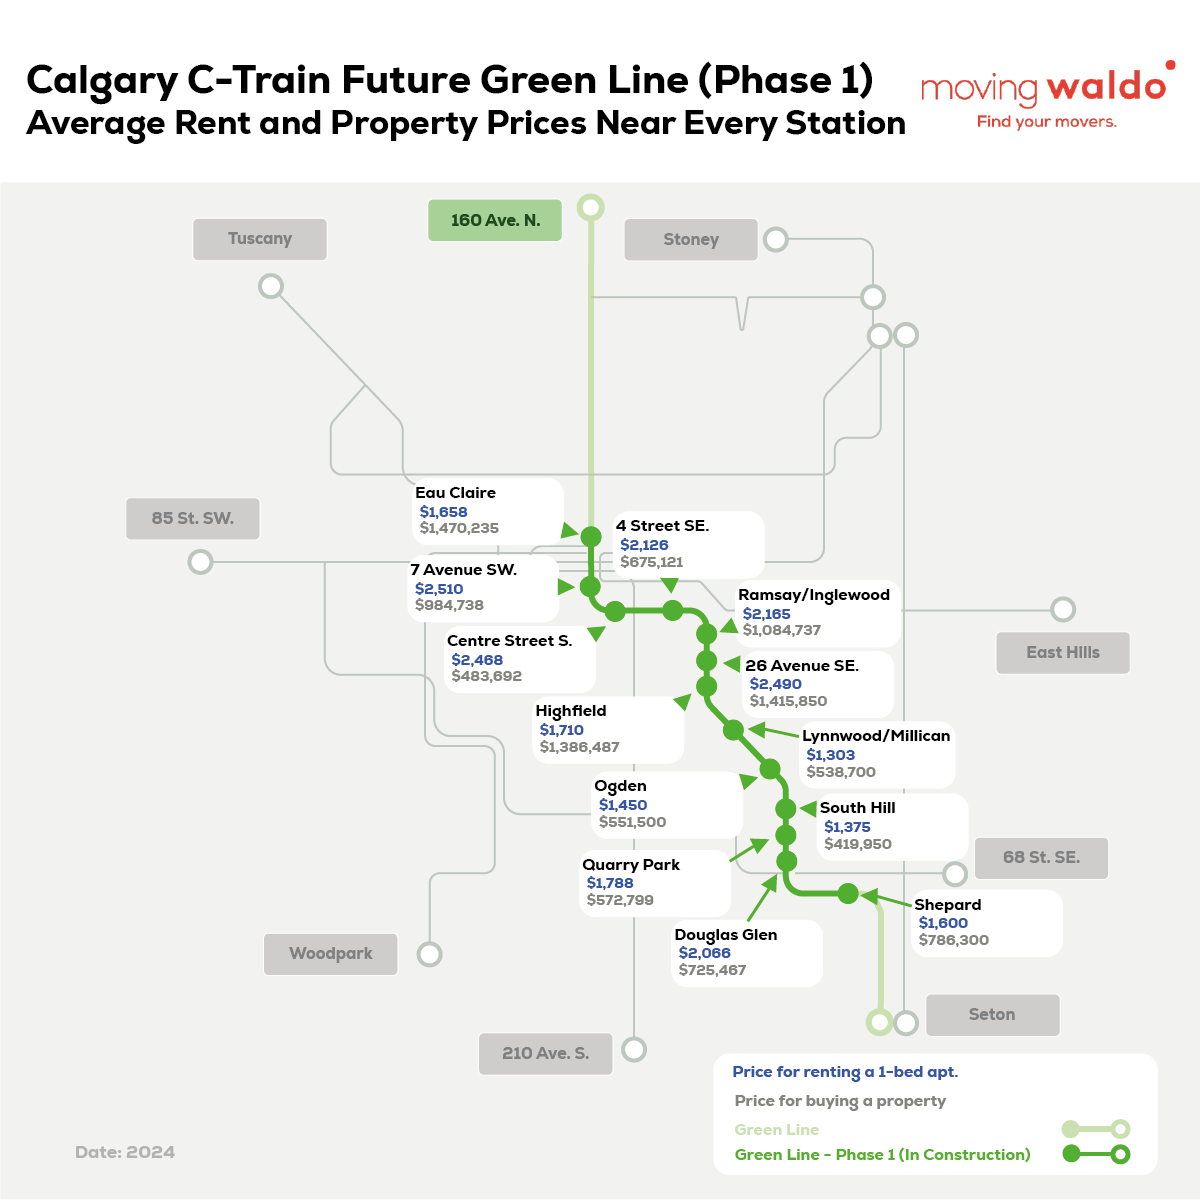 Calgary C-Train Future Green Line (Phase 1): Average Rent and Property Prices Near Every Station